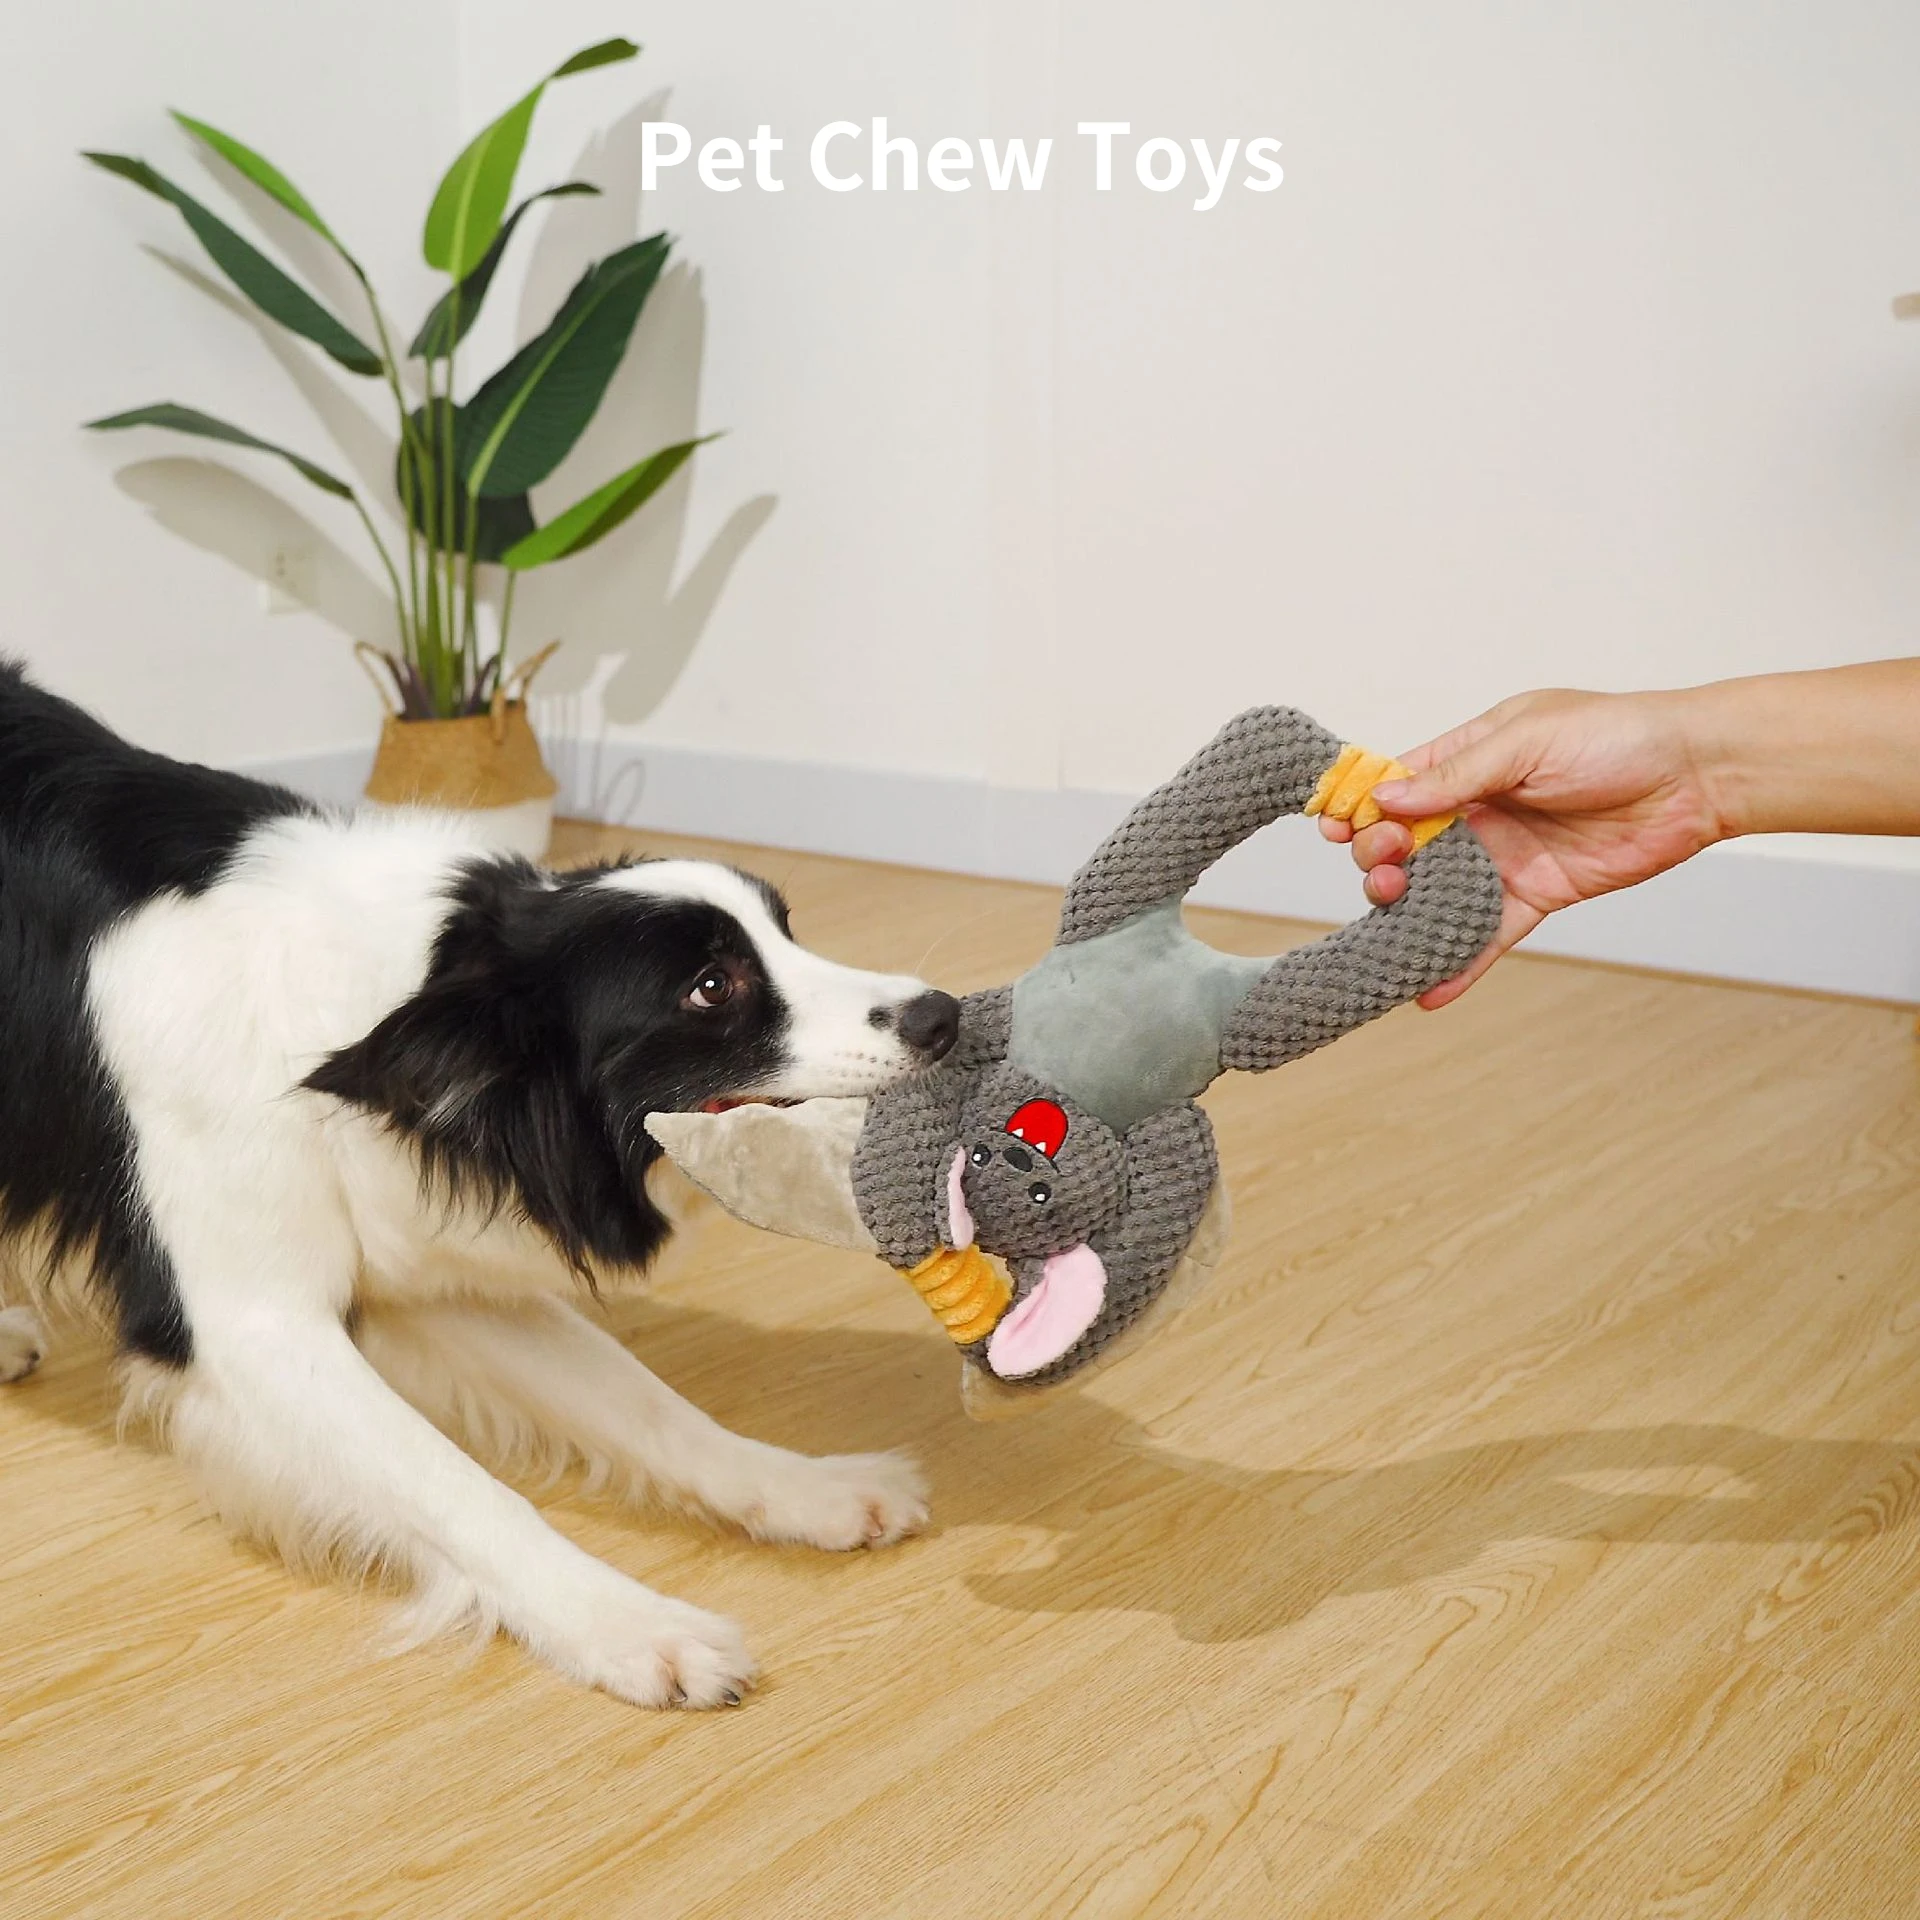 Dog Puppy Toys Pet Supplies Pets Chew Toy Funny Animal Squeak Cleaning for Small Medium Dog Accessories Training Plush Sound